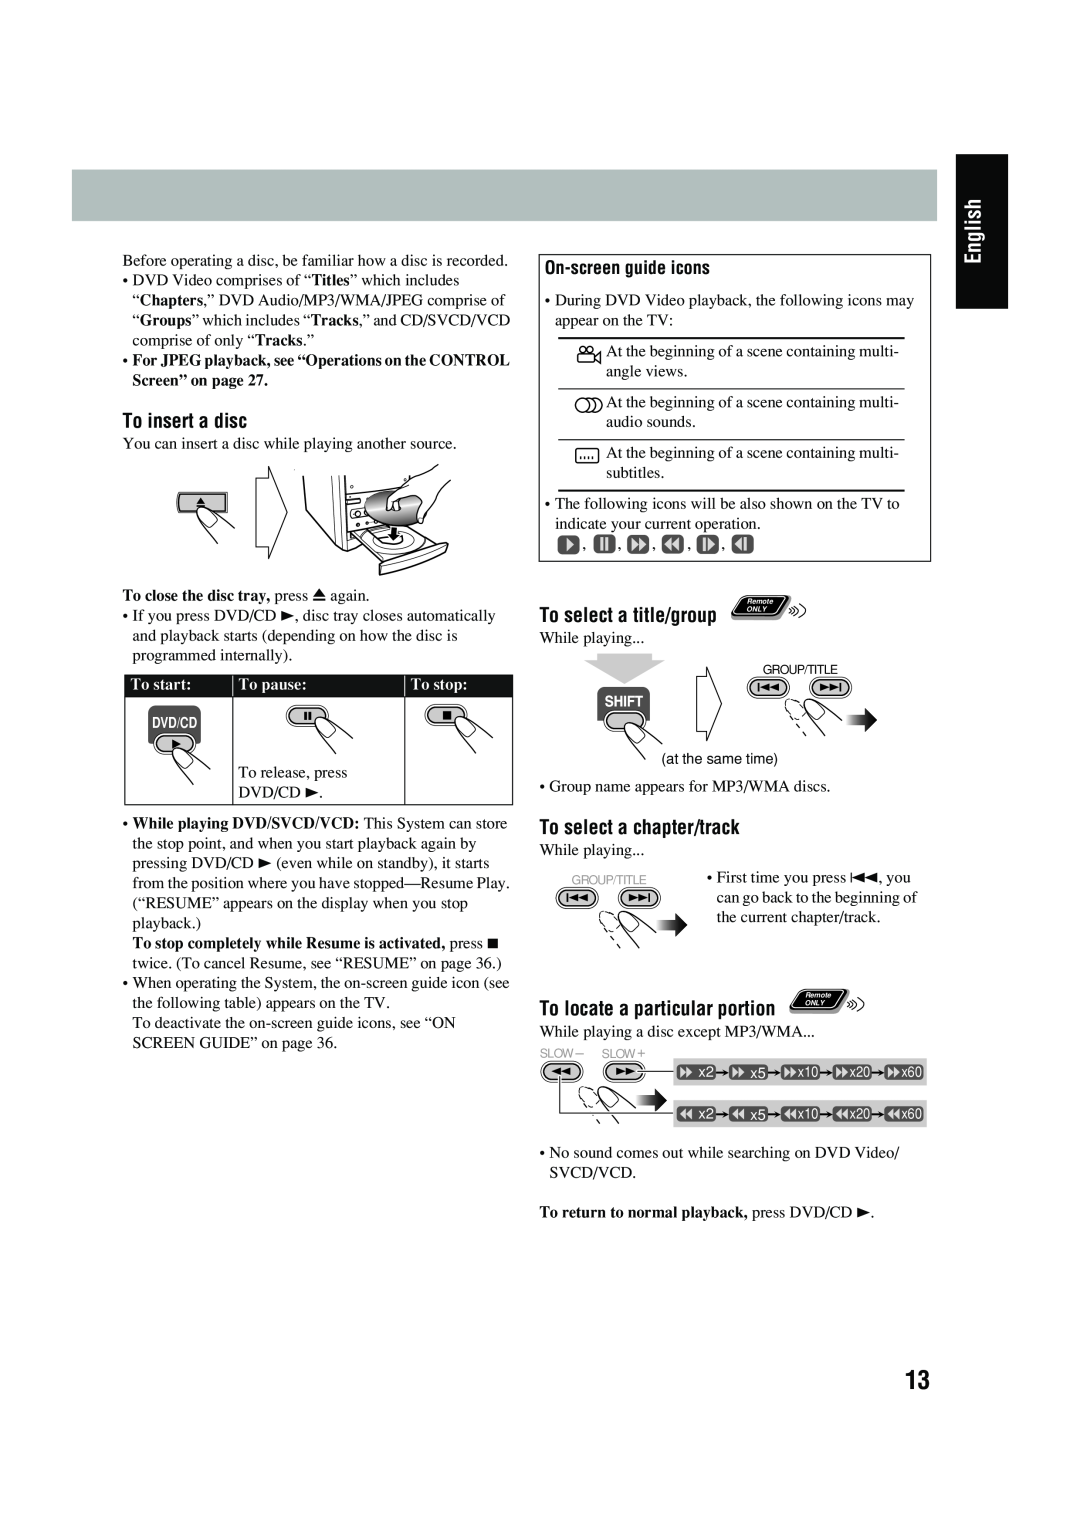 JVC UX-P450 manual To insert a disc, To select a chapter/track, On-screenguide icons, To select a title/group, English 